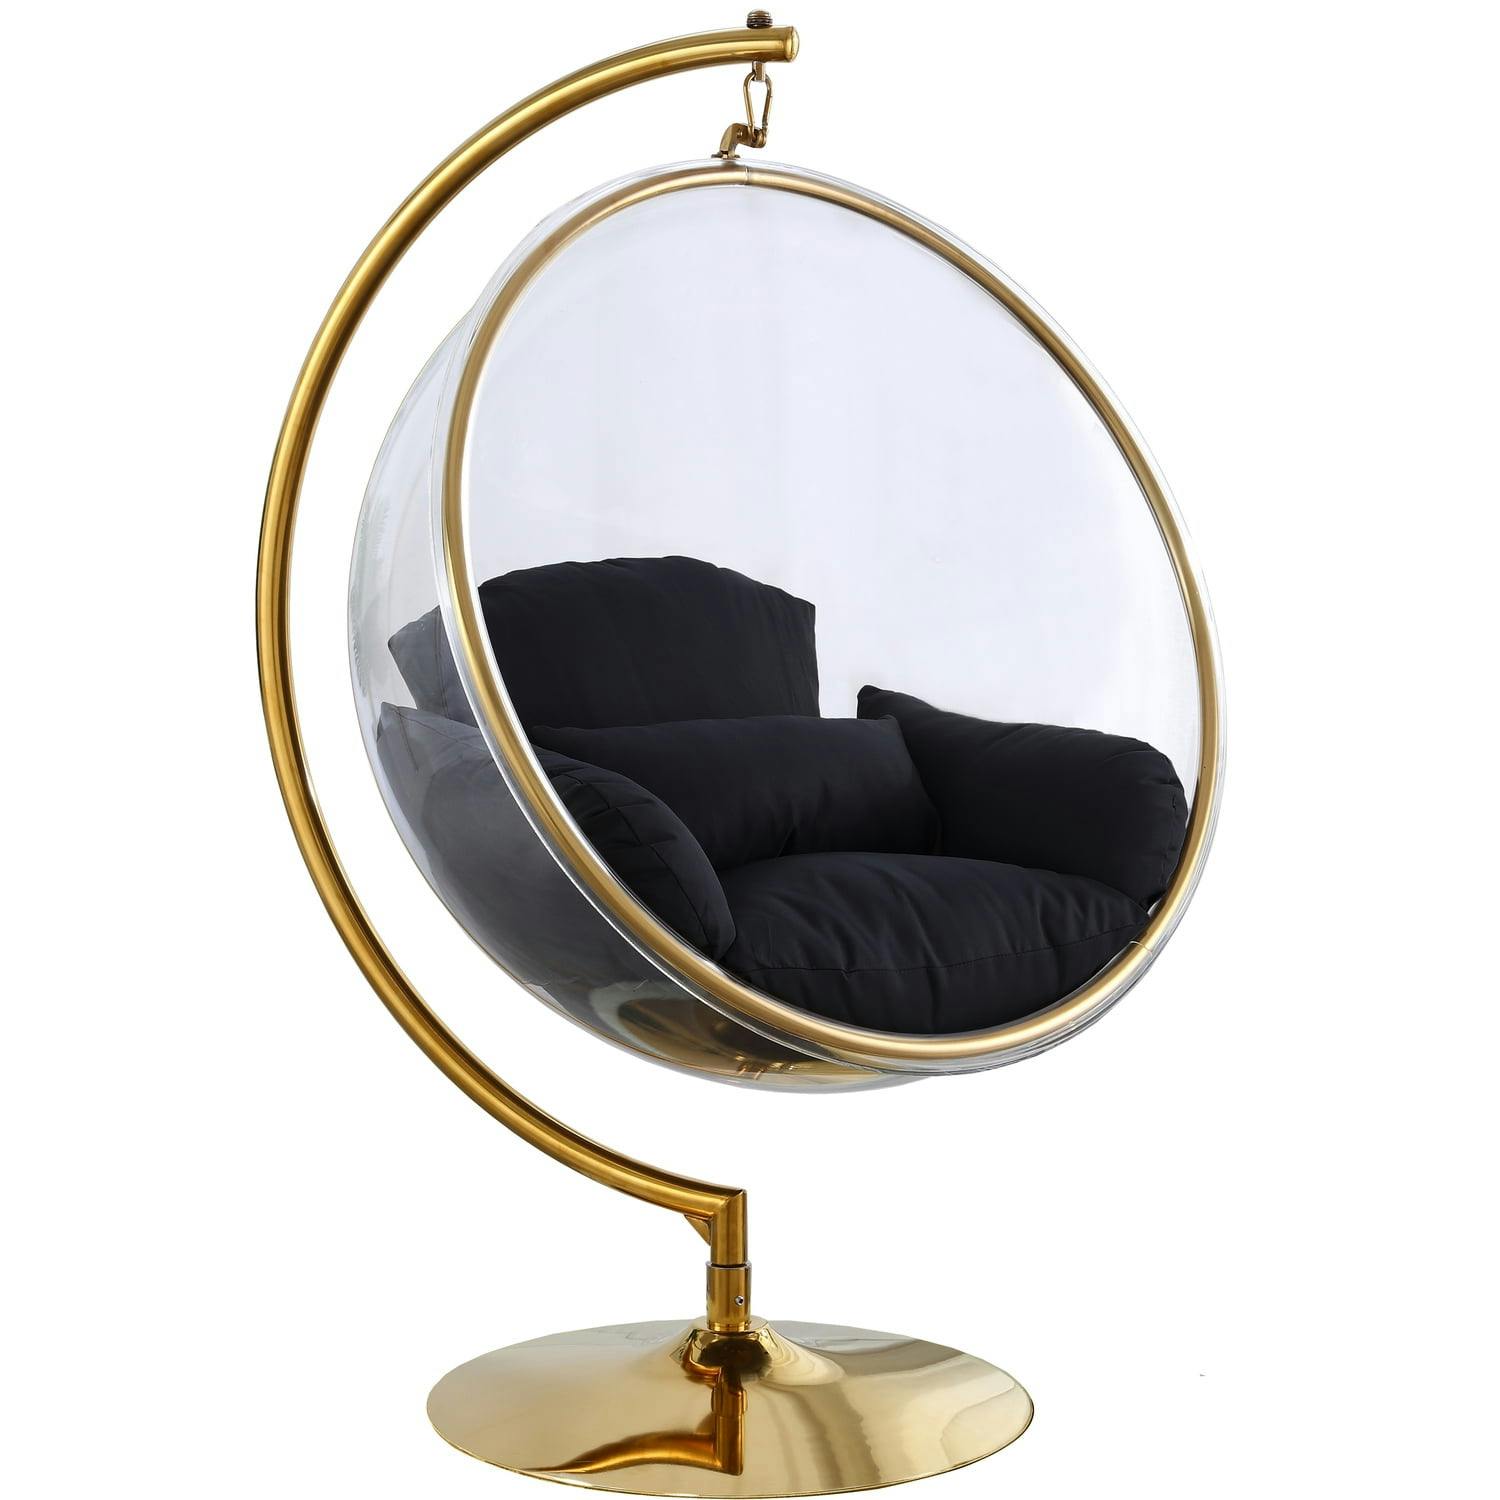 Luna Black and Gold Acrylic Swing Bubble Accent Chair, 41.5" W